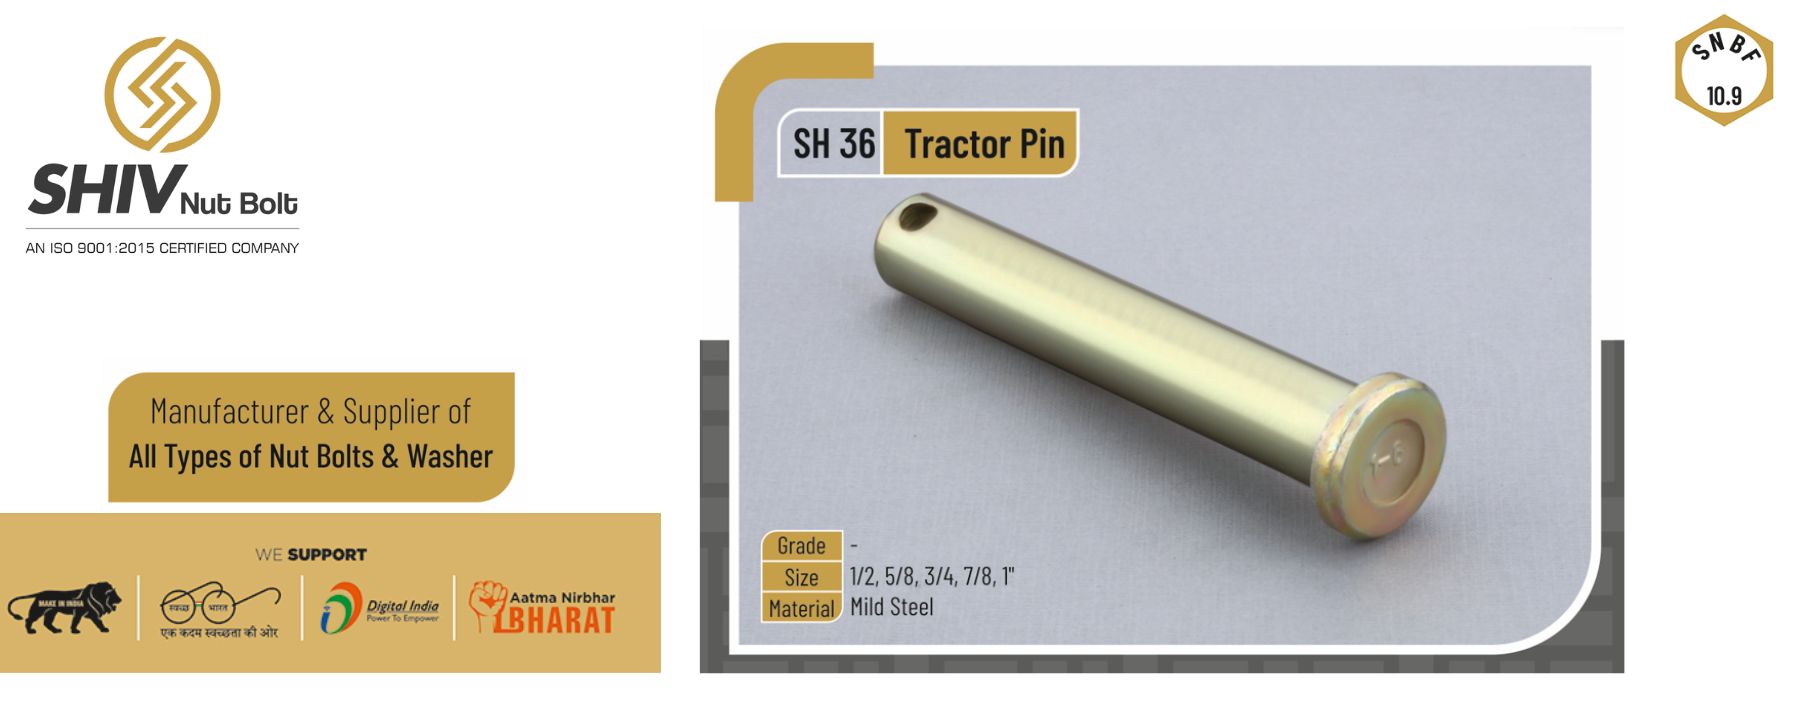 Tractor Pin Manufacturers In Maharashtra